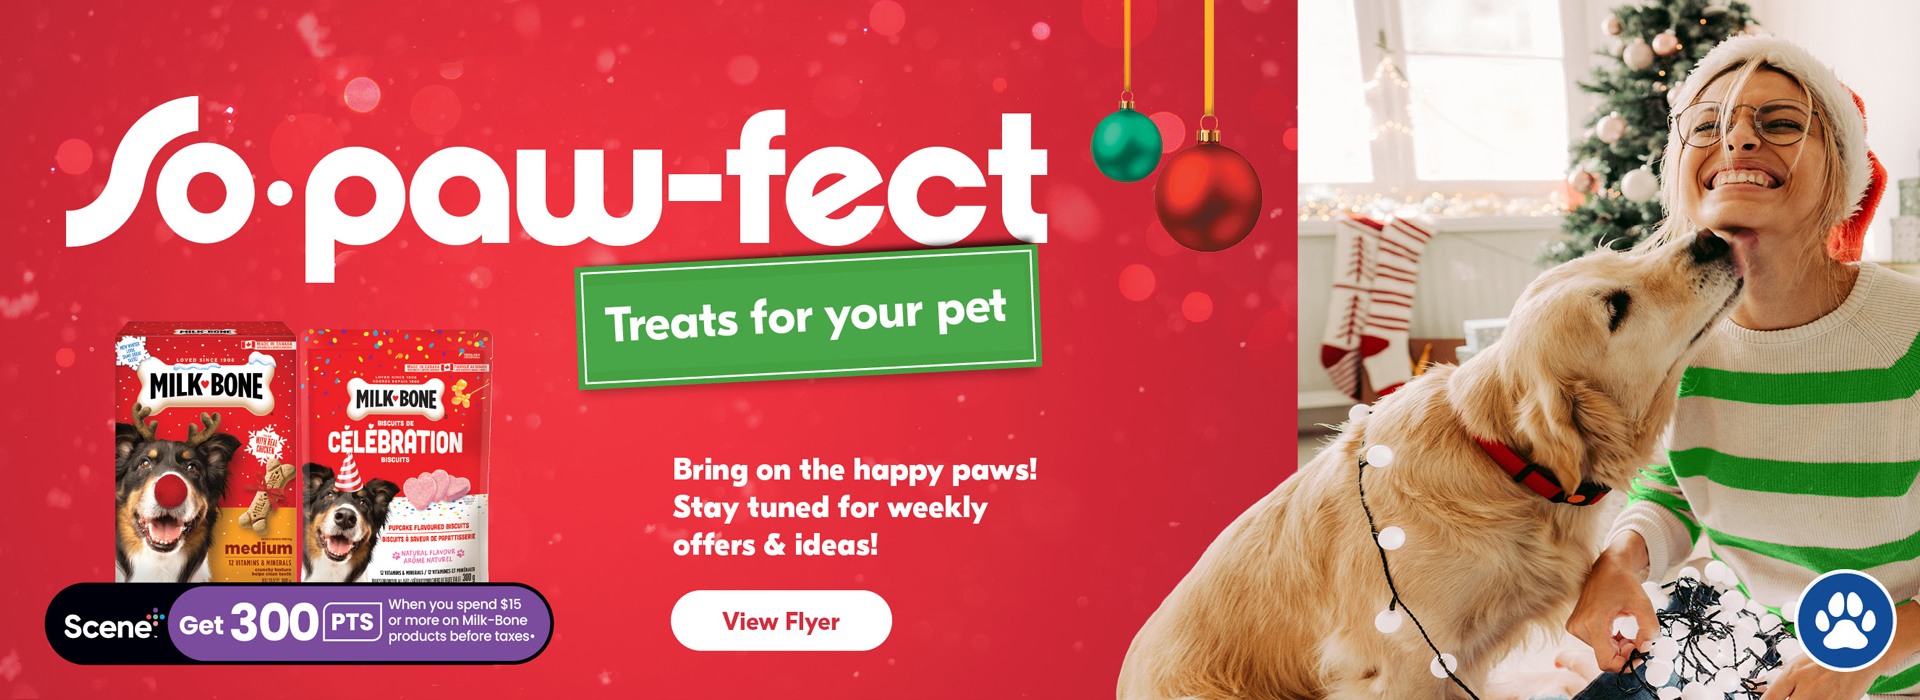 Treats for your pet